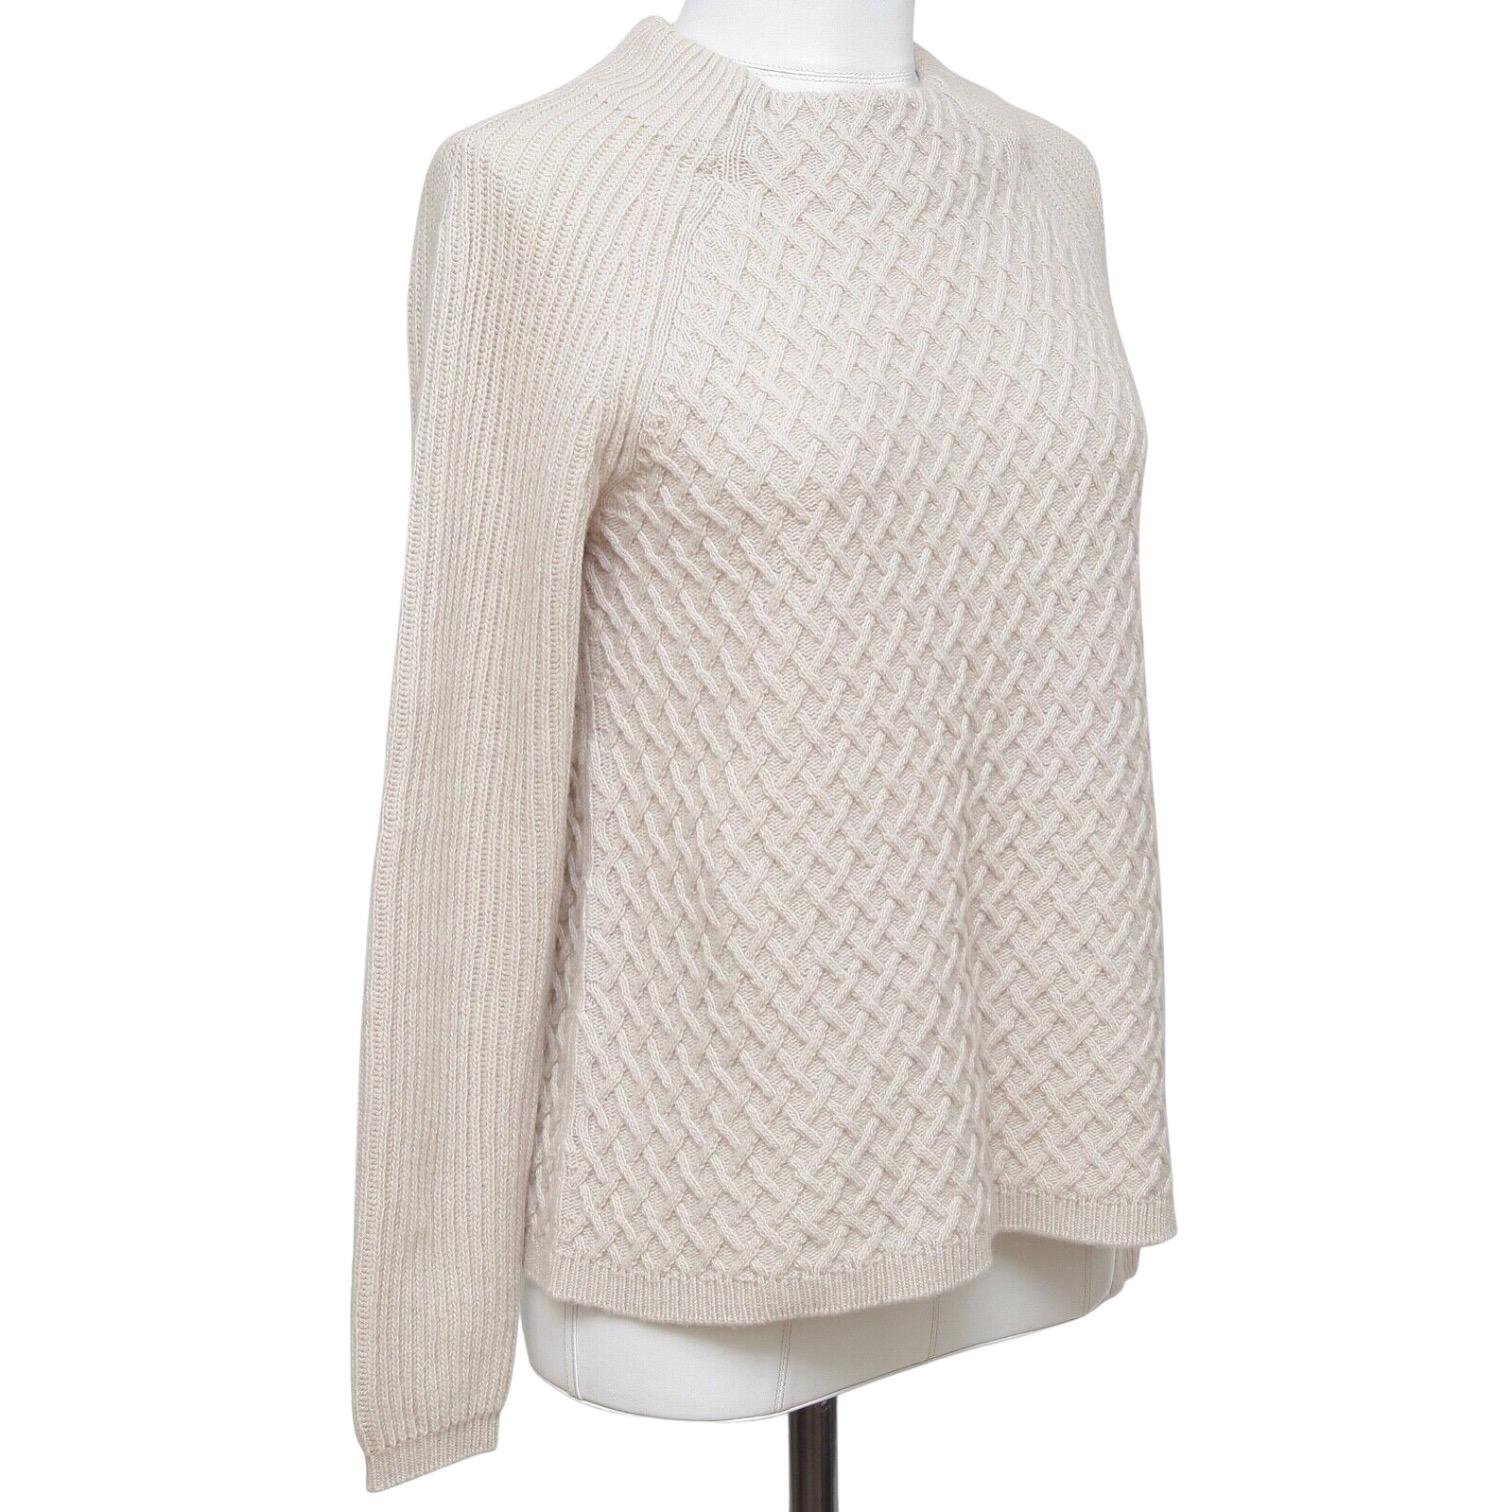 GUARANTEED AUTHENTIC MAX MARA SWEATER

Design:
• Textured beige moc turtleneck sweater.
• Long sleeve.
• Pullover.
   
Size: S

Material: 90% Wool, 10% Cashmere

Measurements (Approximate Laid Flat, Give To Knit):
• Shoulder to Shoulder, 19